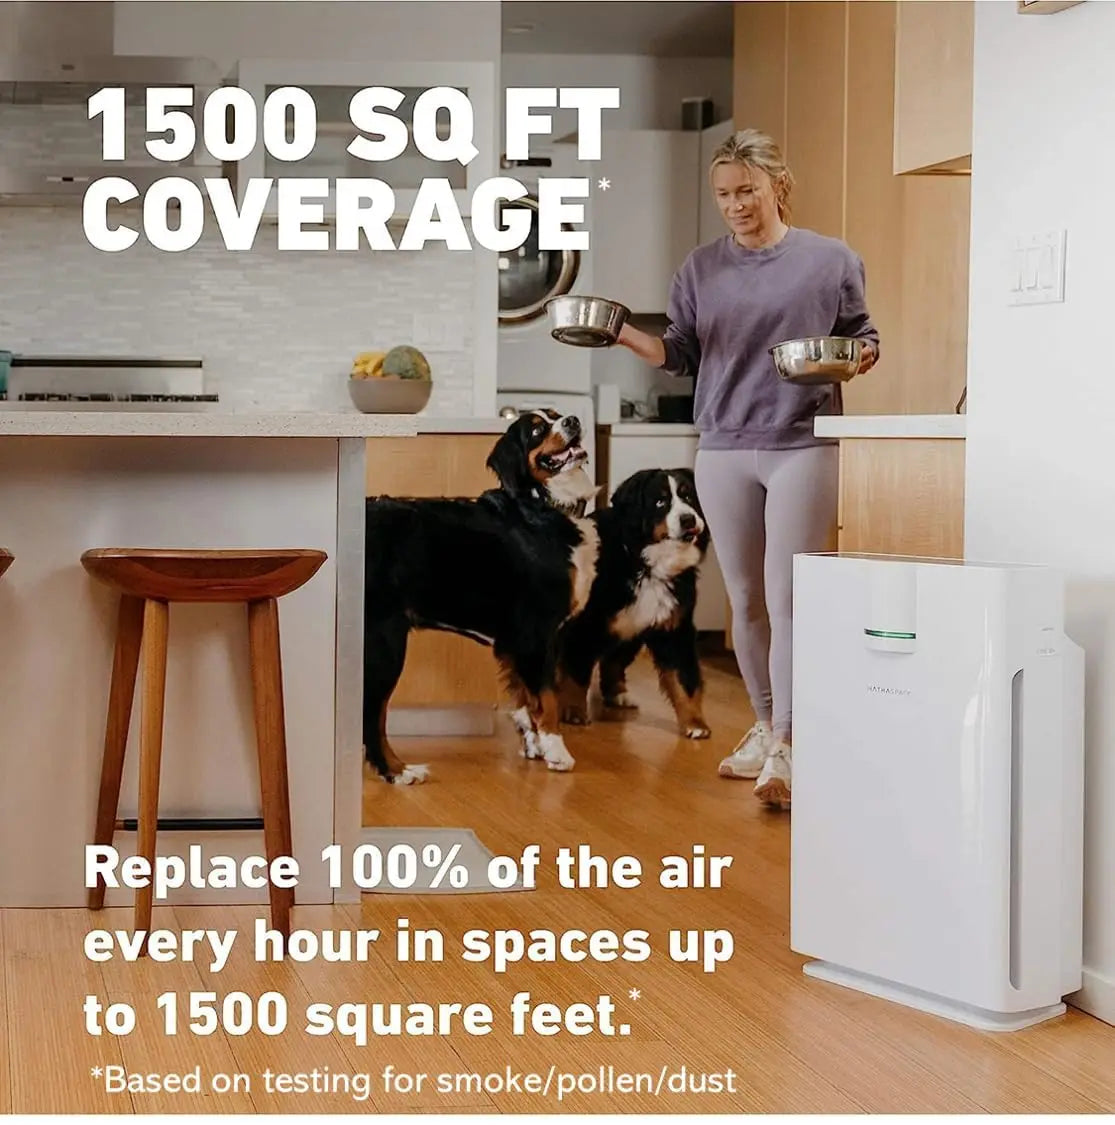 Smart Air Purifiers, Large Rooms - HSP002 - True HEPA Air Purifier, Cleaner & Filter for Allergies, Smoke